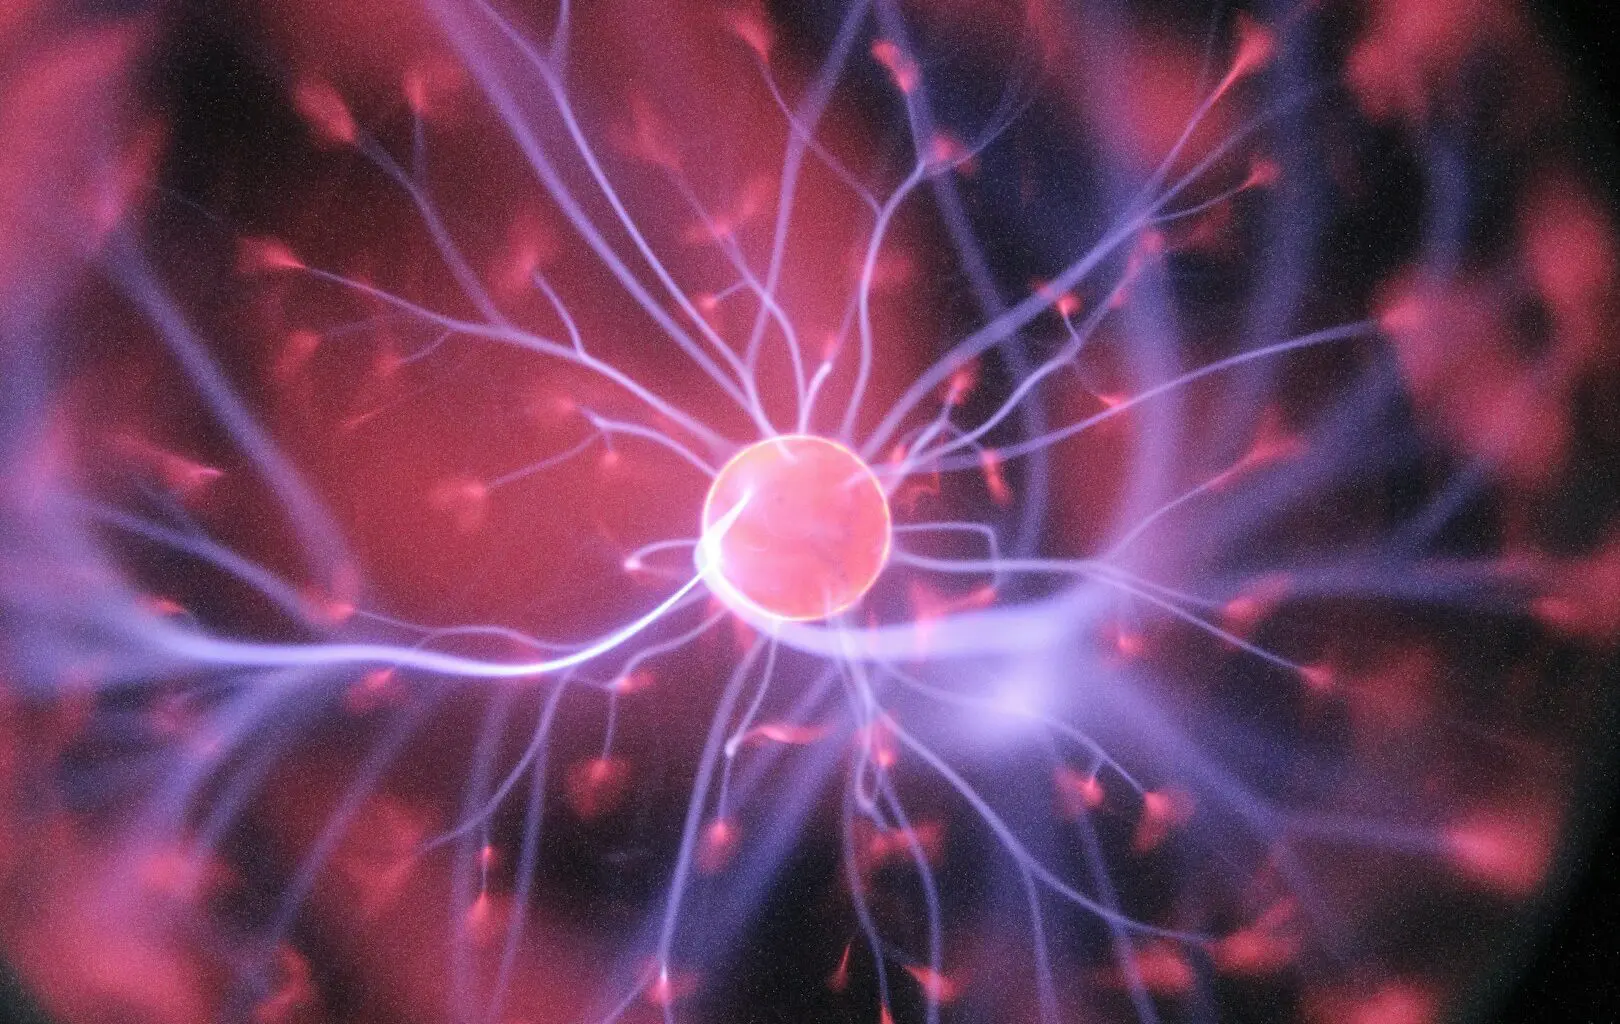 Purple and pink plasma ball, representing the topic of psychology